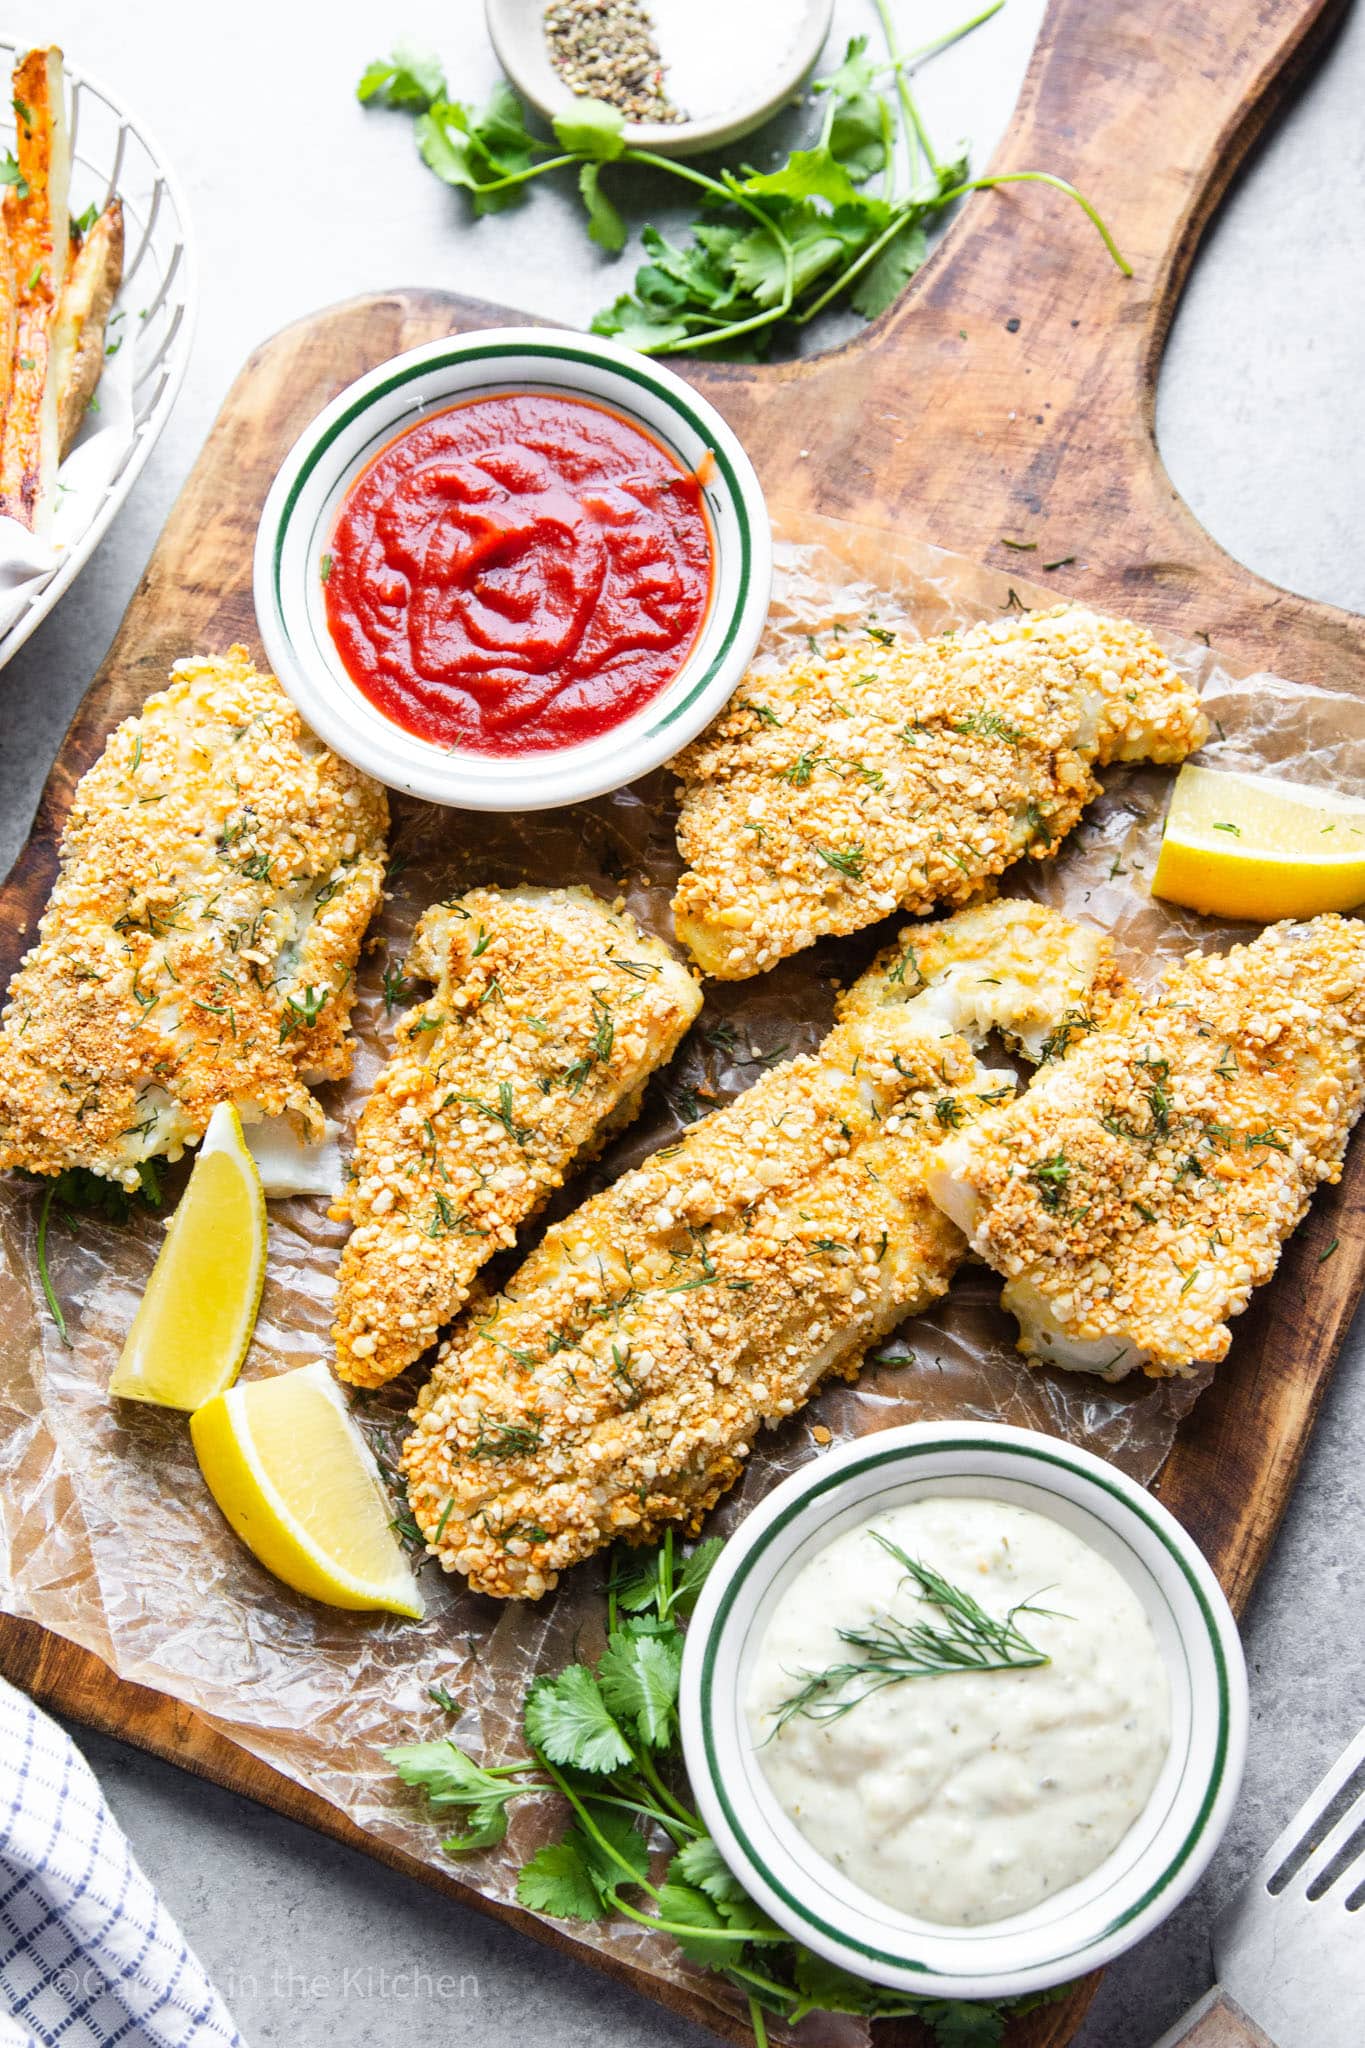 baked panko-coated fish filets on a wood board with small bowls of ketchup and tartar sauce on the side.